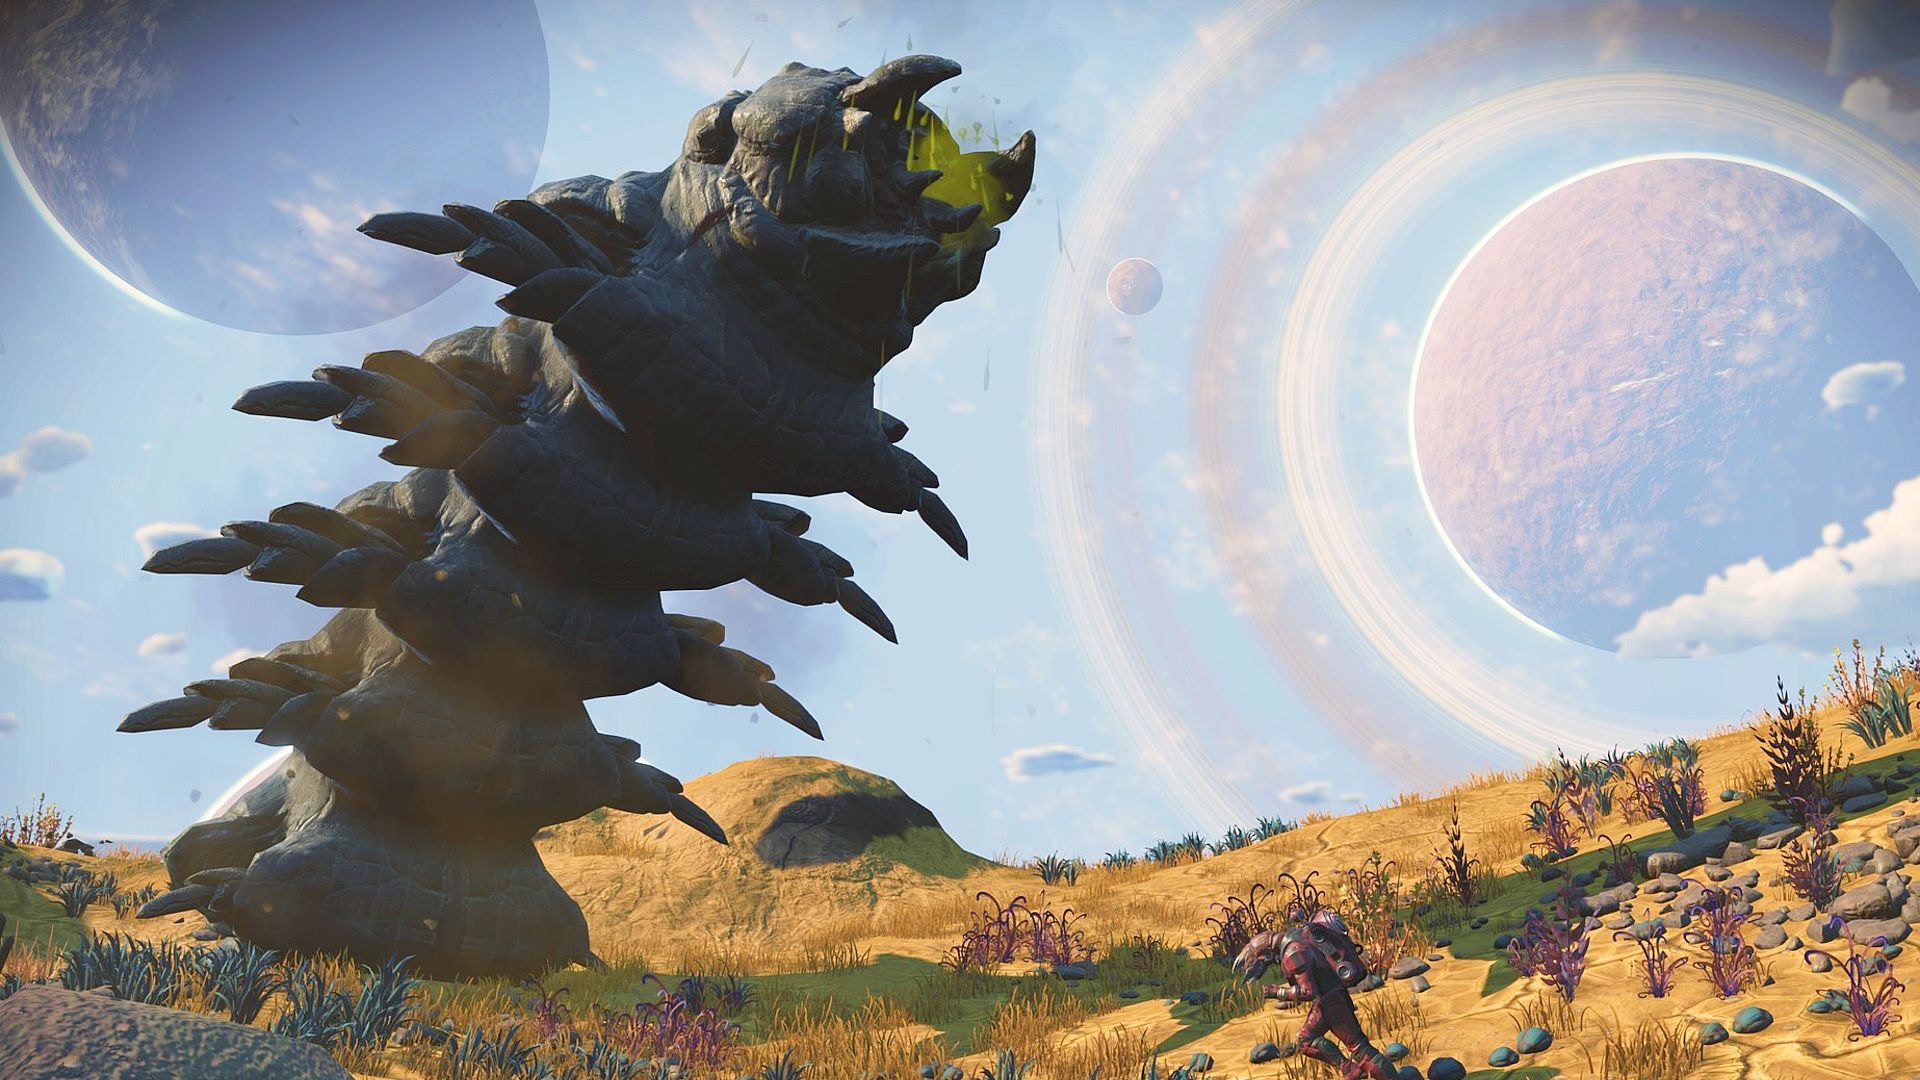 A giant centipede alien emerging from a planet's surface in No Man's Sky